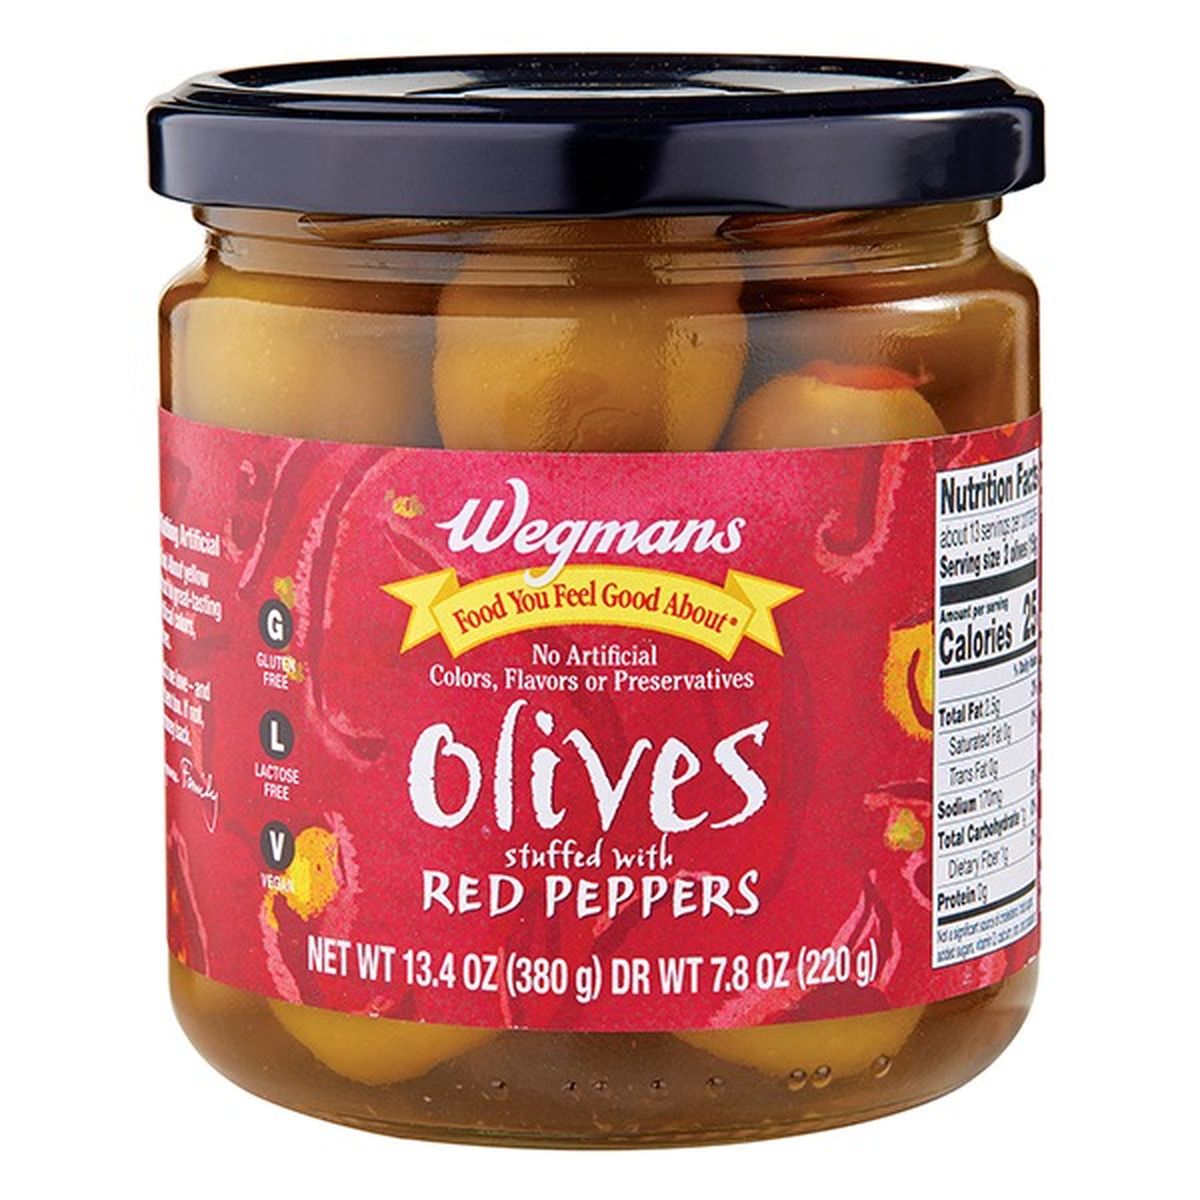 Calories in Wegmans Olives, Stuffed with Red Pepper